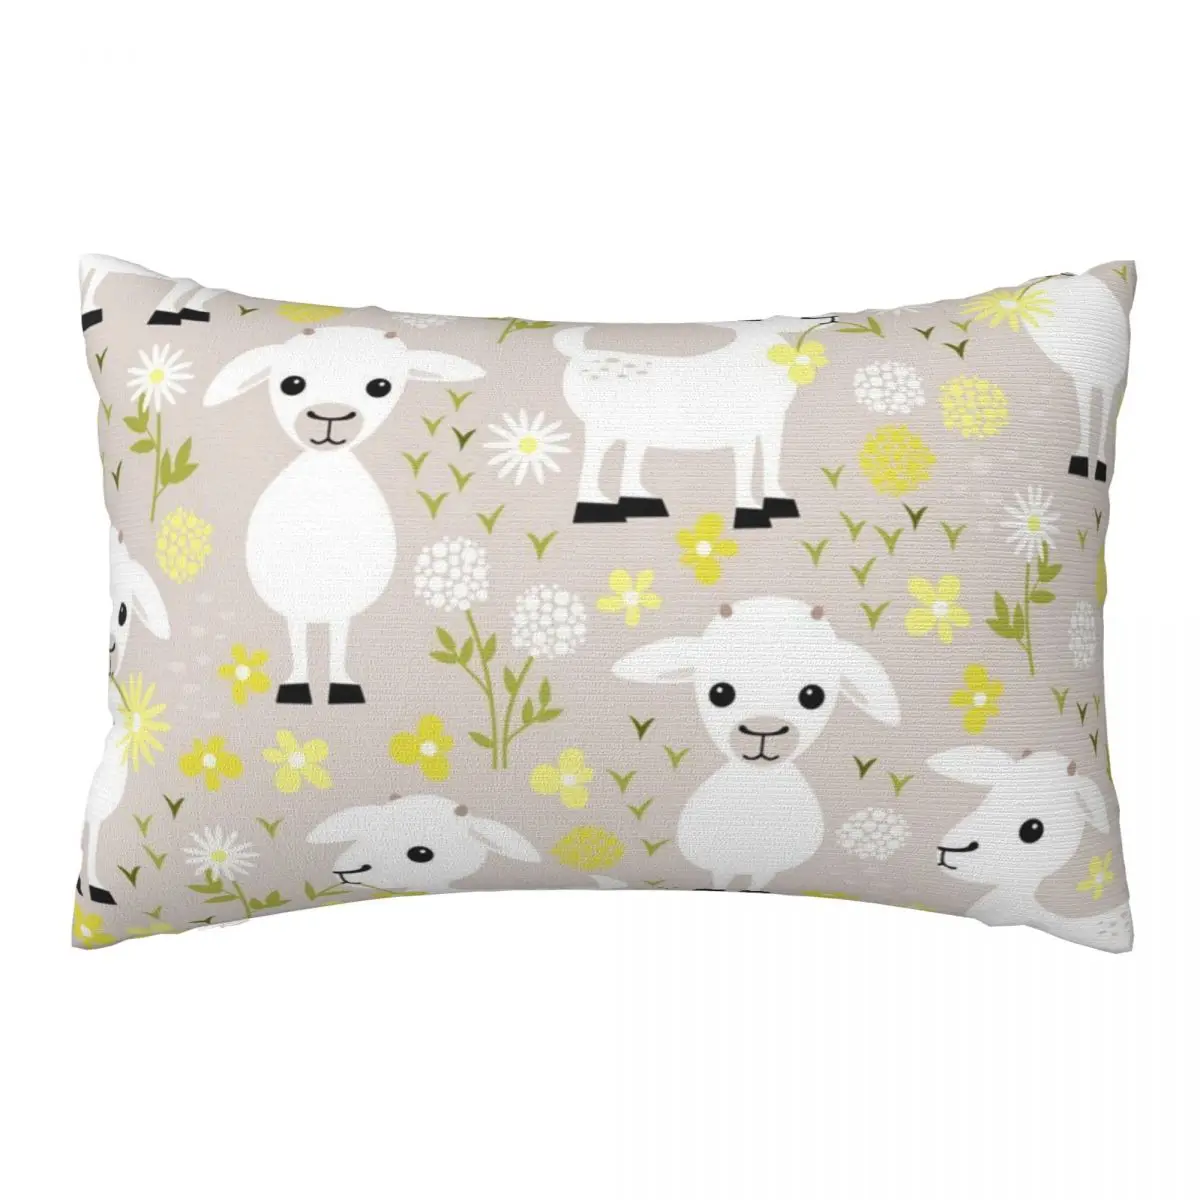 

Baby Goats Decorative Pillow Covers Throw Pillow Cover Home Pillows Shells Cushion Cover Zippered Pillowcase